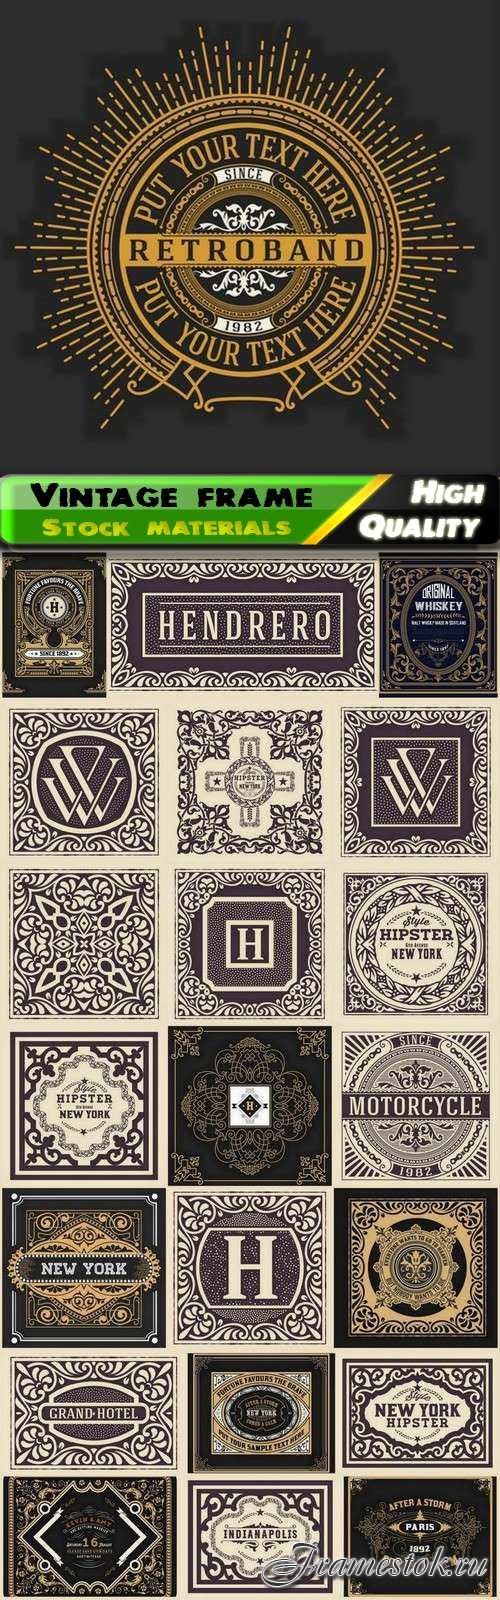 Vintage frame and calligraphic elements in hipster style - 25 Eps